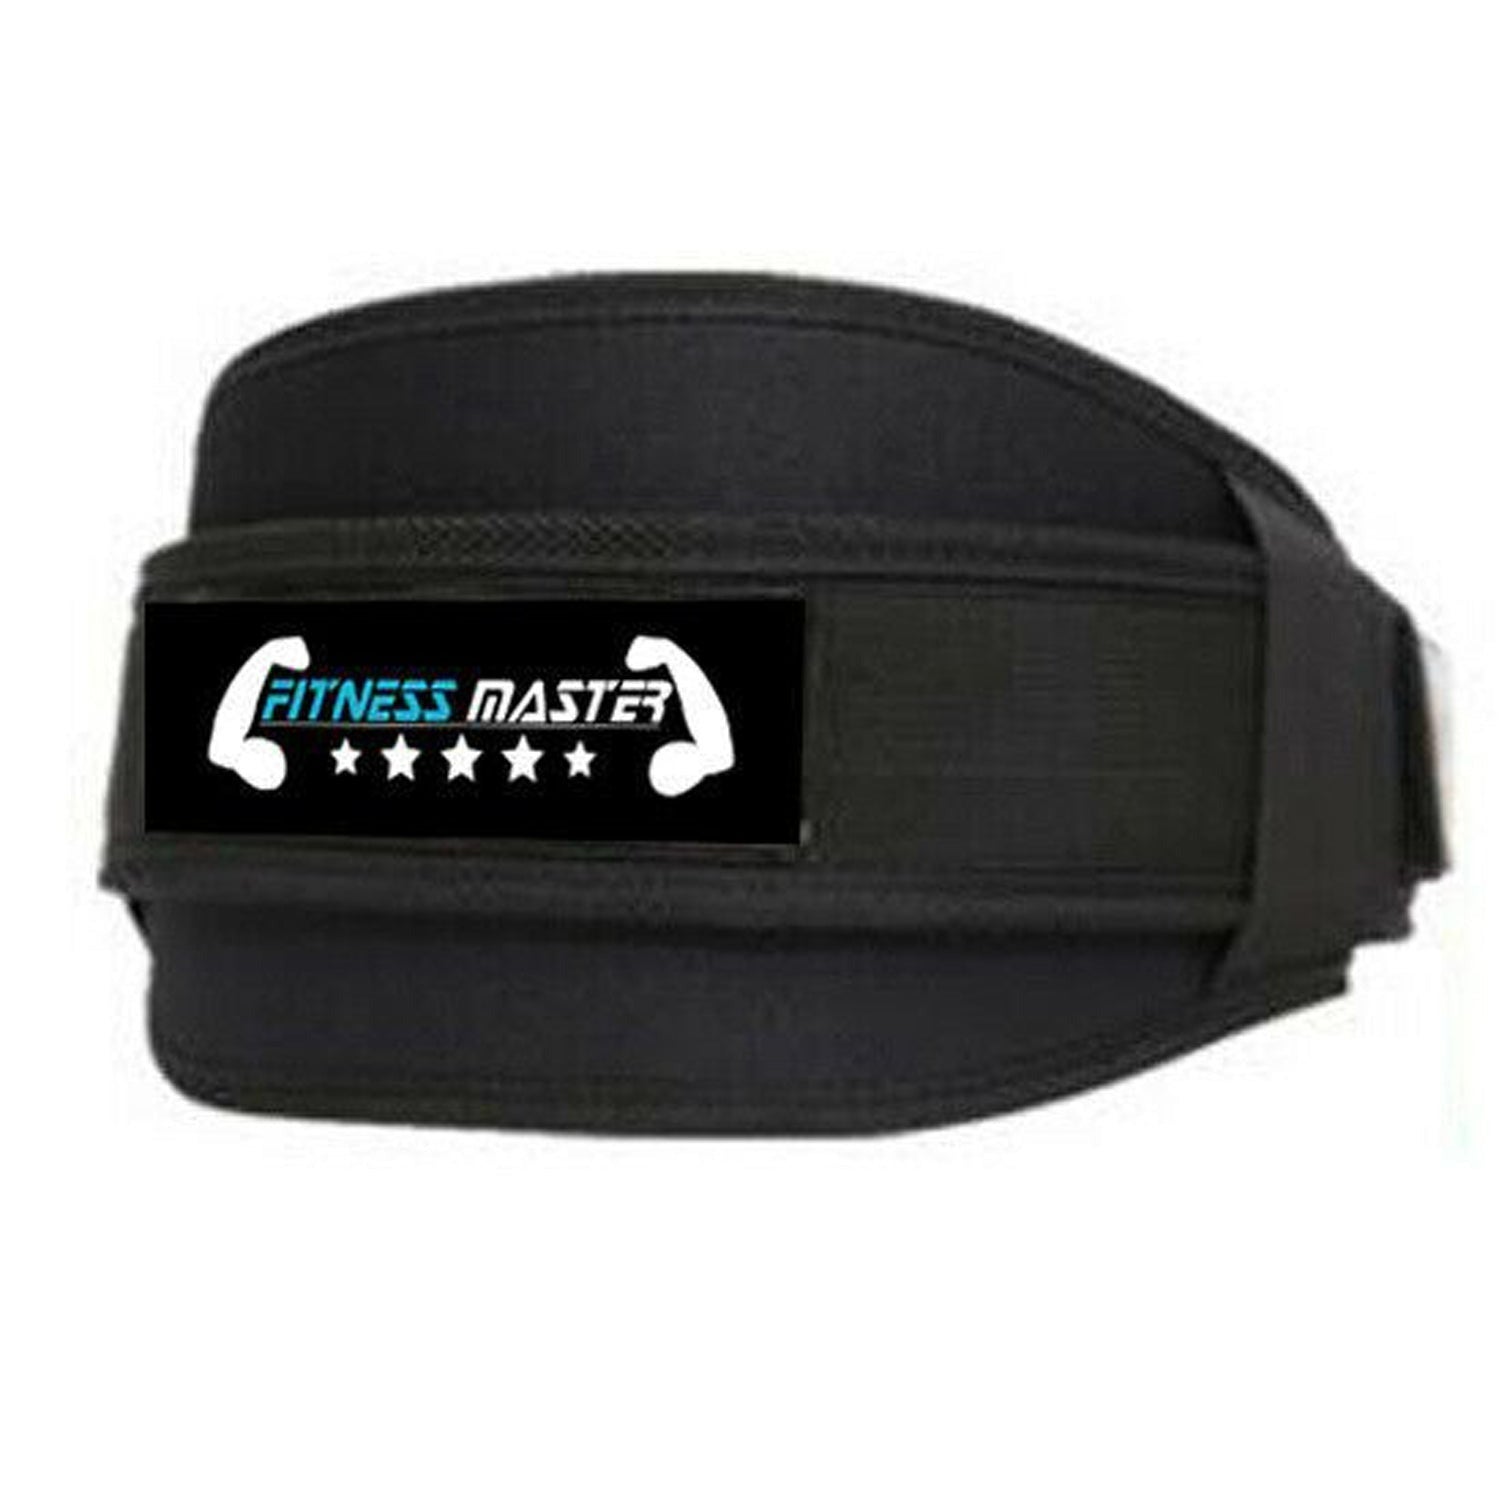 Weight Lifting Belt Body Building Fitness Gym Neoprene Waist Double Back Support